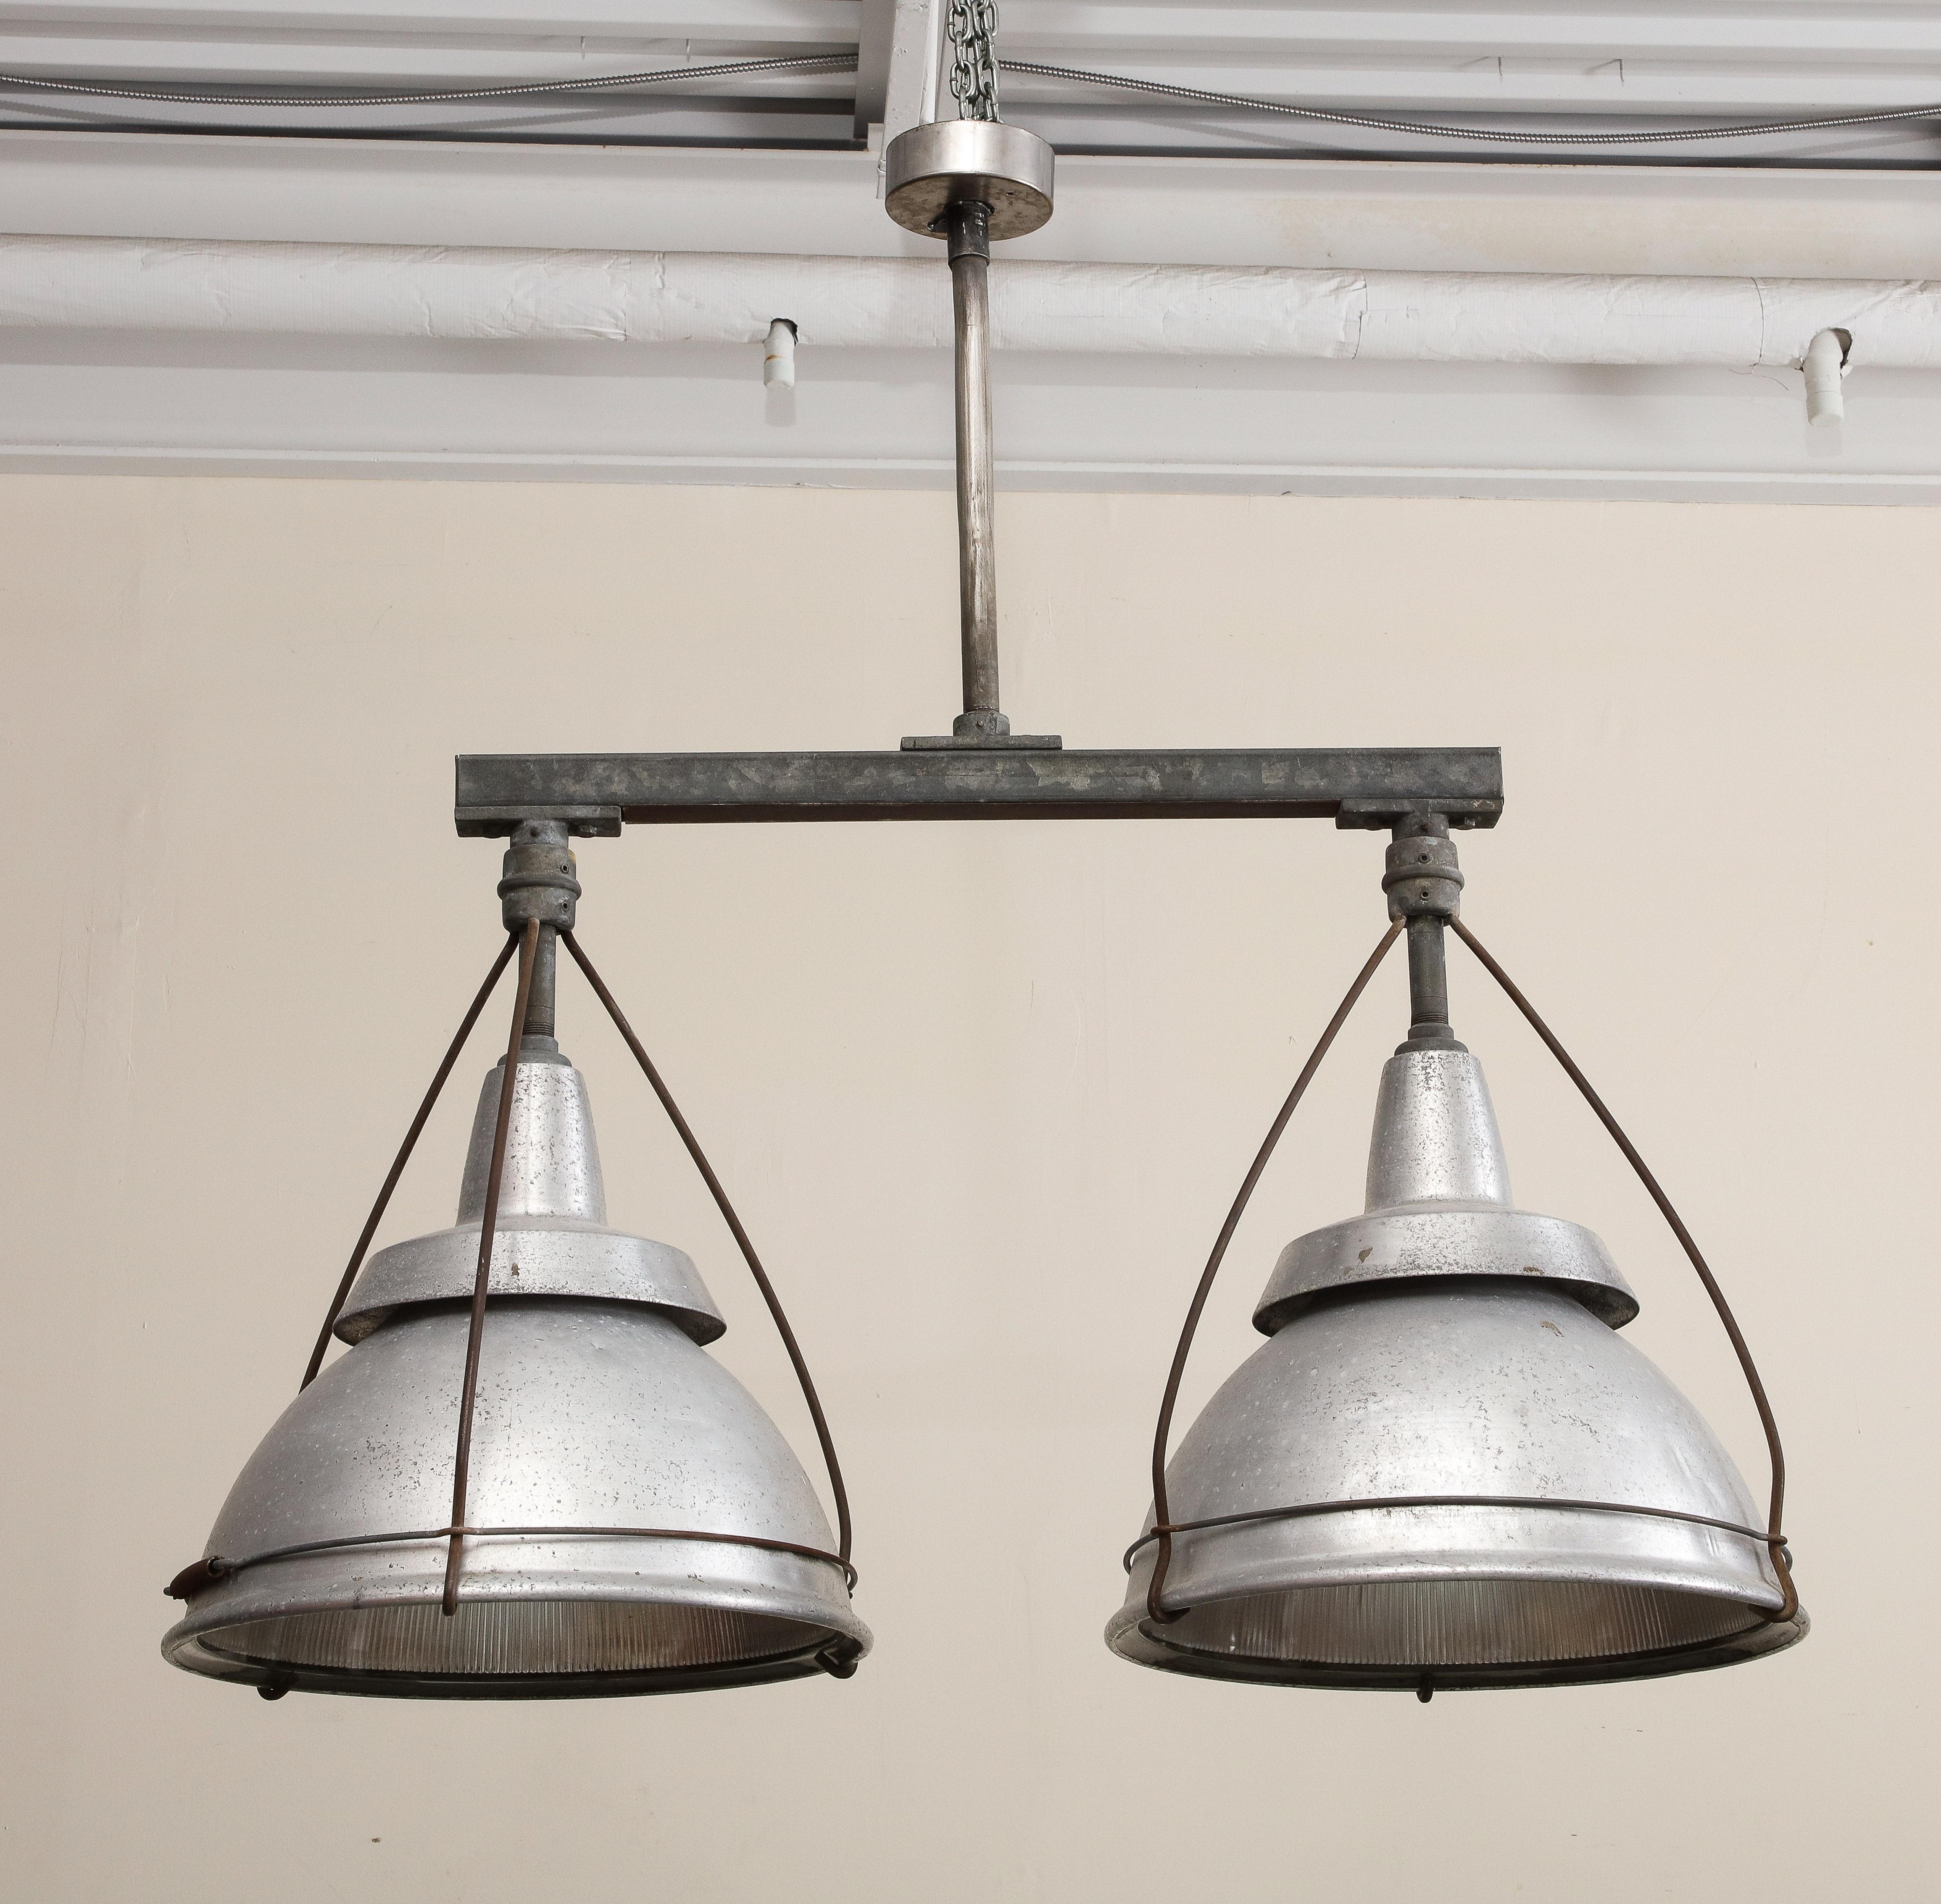 Early 20th Century Large Ceiling-Mounted Industrial Double Pendant Light, C. 1920 For Sale